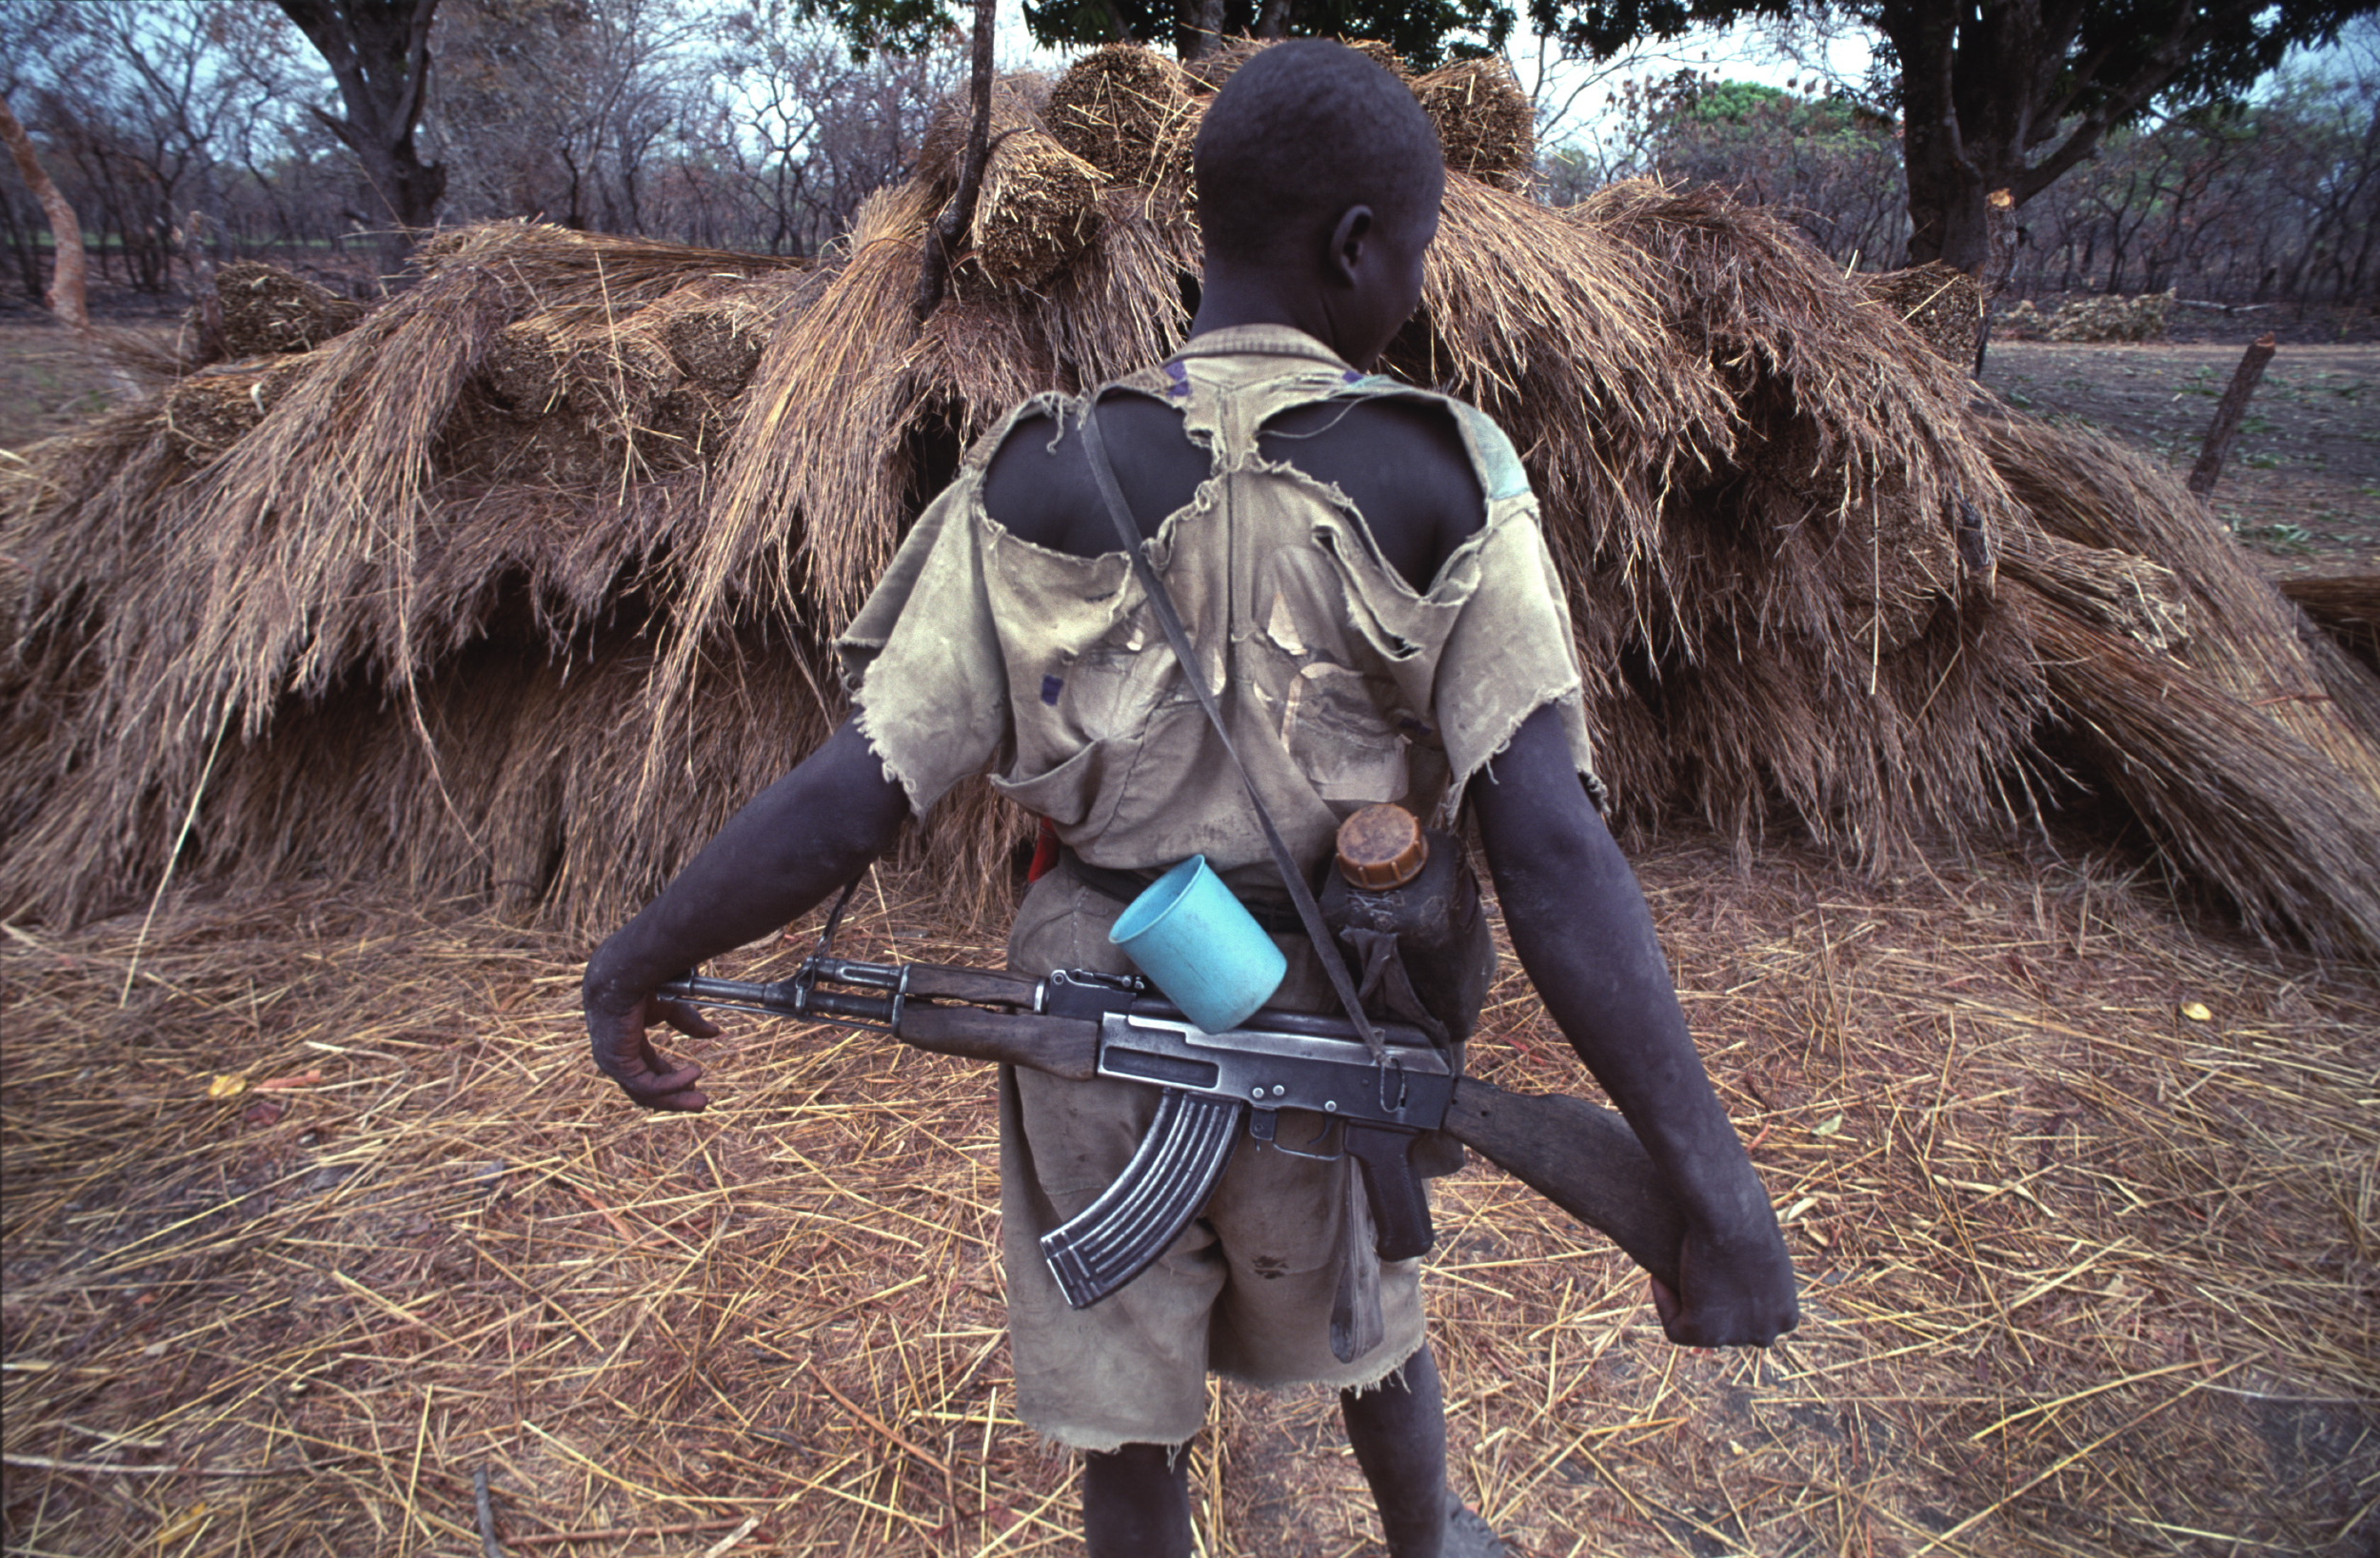  At times the SPLA were challenged for war funds and the cloths they were wearing were literally falling off their backs.&nbsp;During Sudan's long- running civil war. 1993 